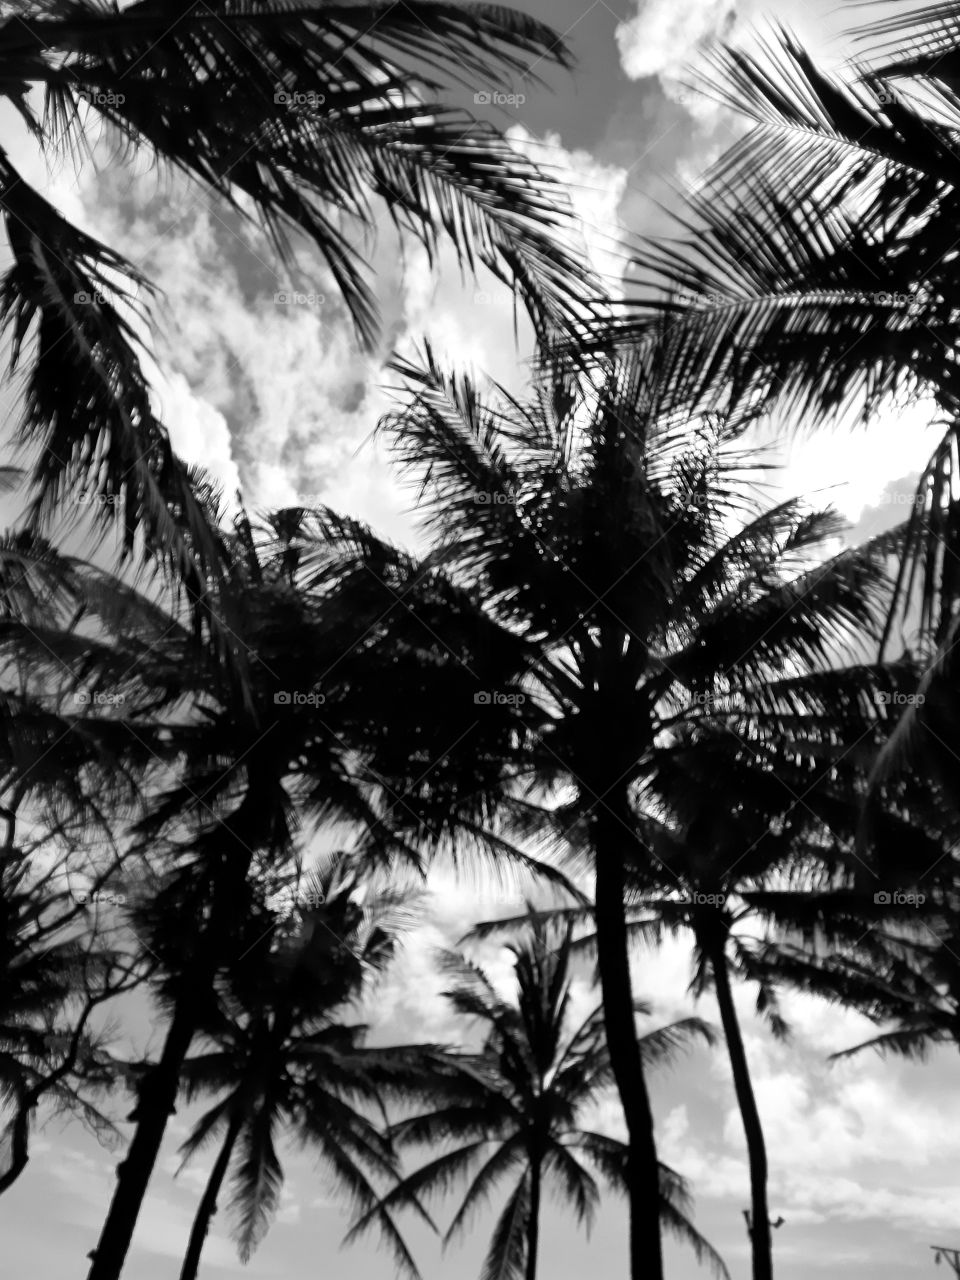 Monochrome style of coconut palm trees on the beach